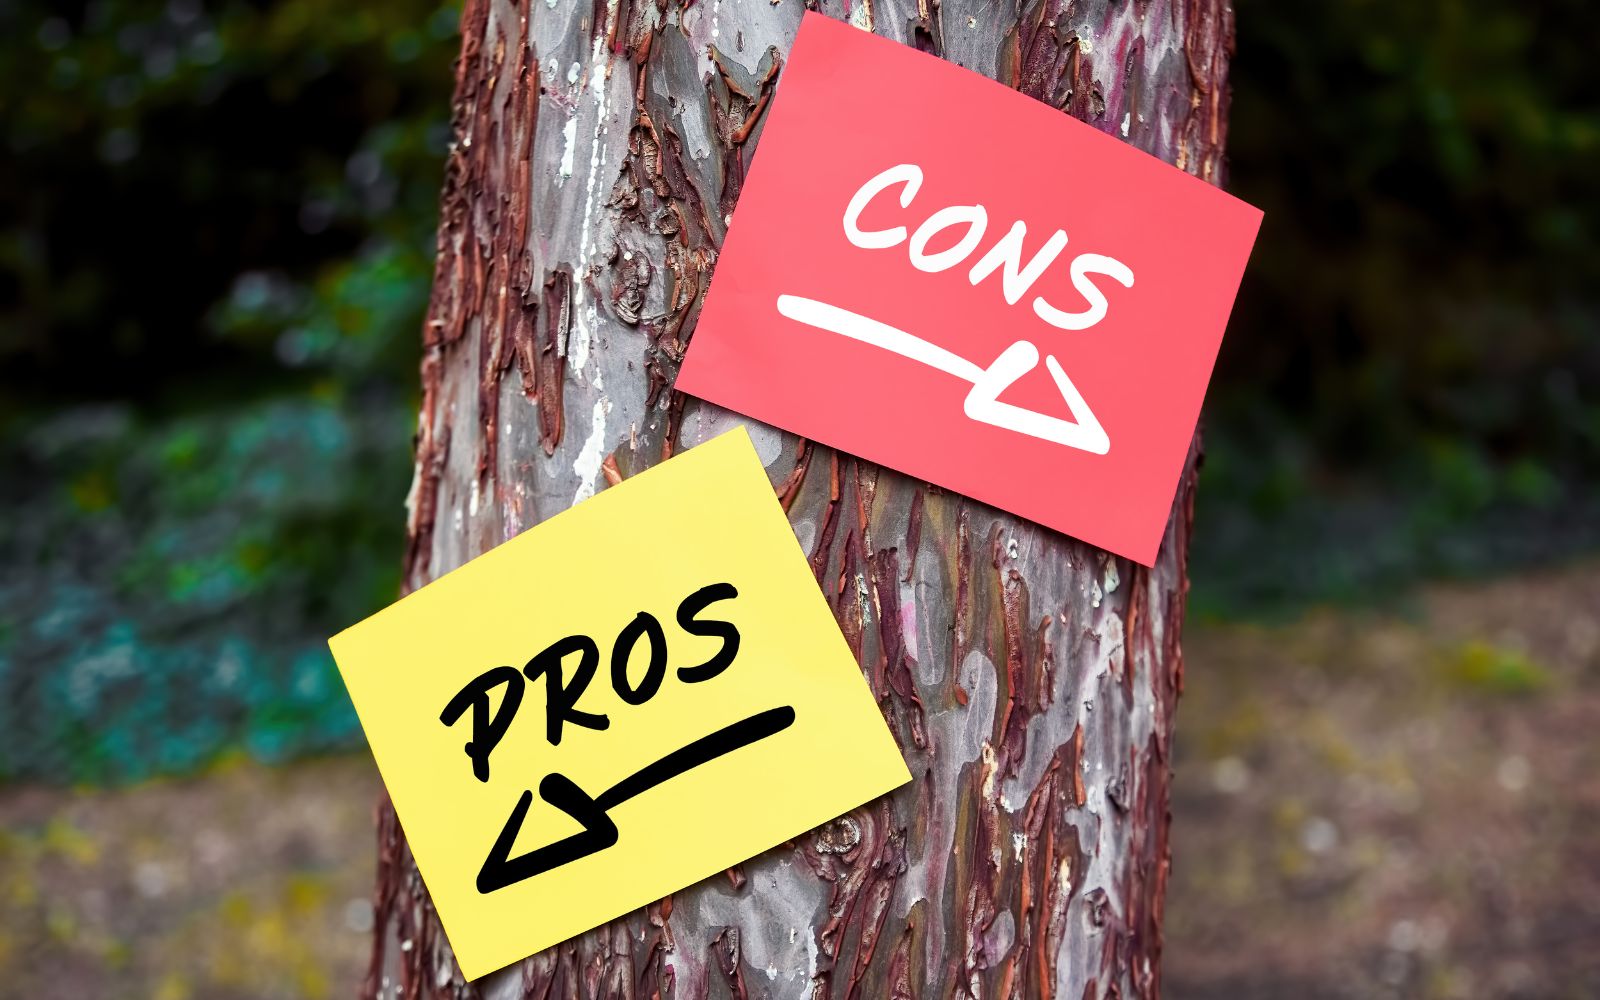 Ecologist pros and cons